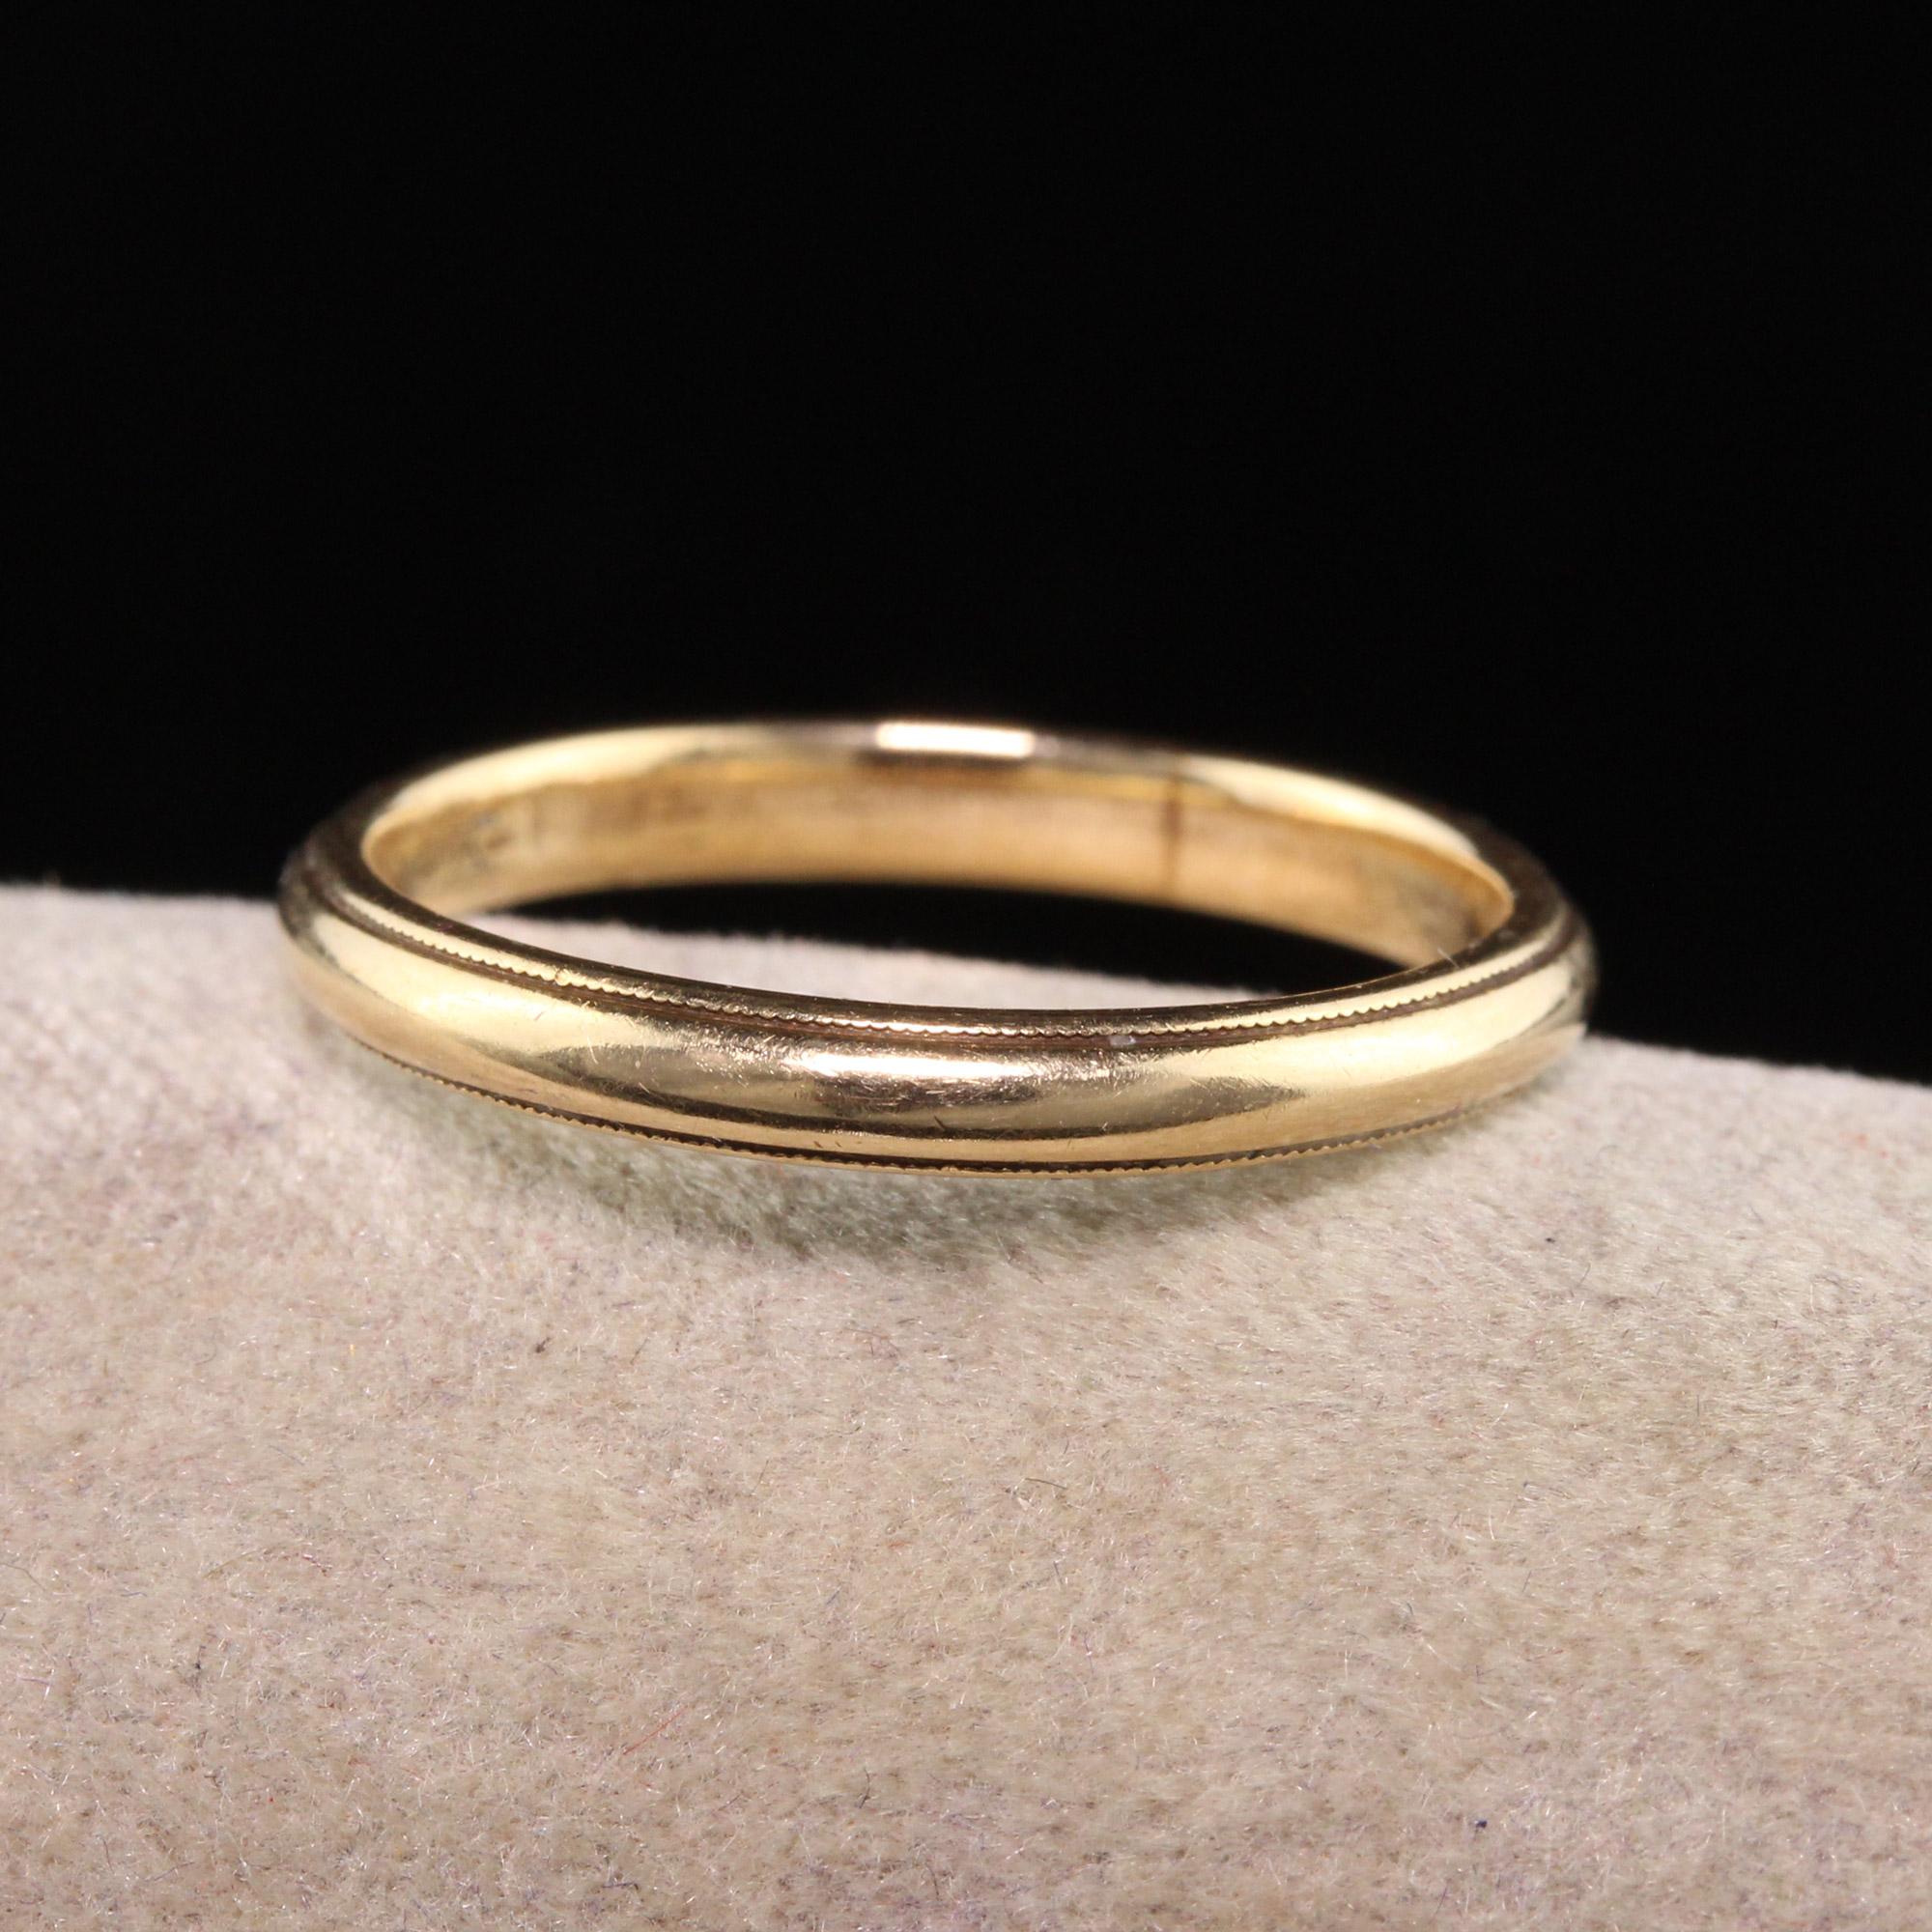 Beautiful Antique Art Deco 14K Yellow Gold Classic Engraved Wedding Band. This classic wedding band is crafted in 14K yellow gold and has a subtle design that can be stacked with other bands.

Item #R1215

Metal: 14K Yellow Gold

Weight: 2.1